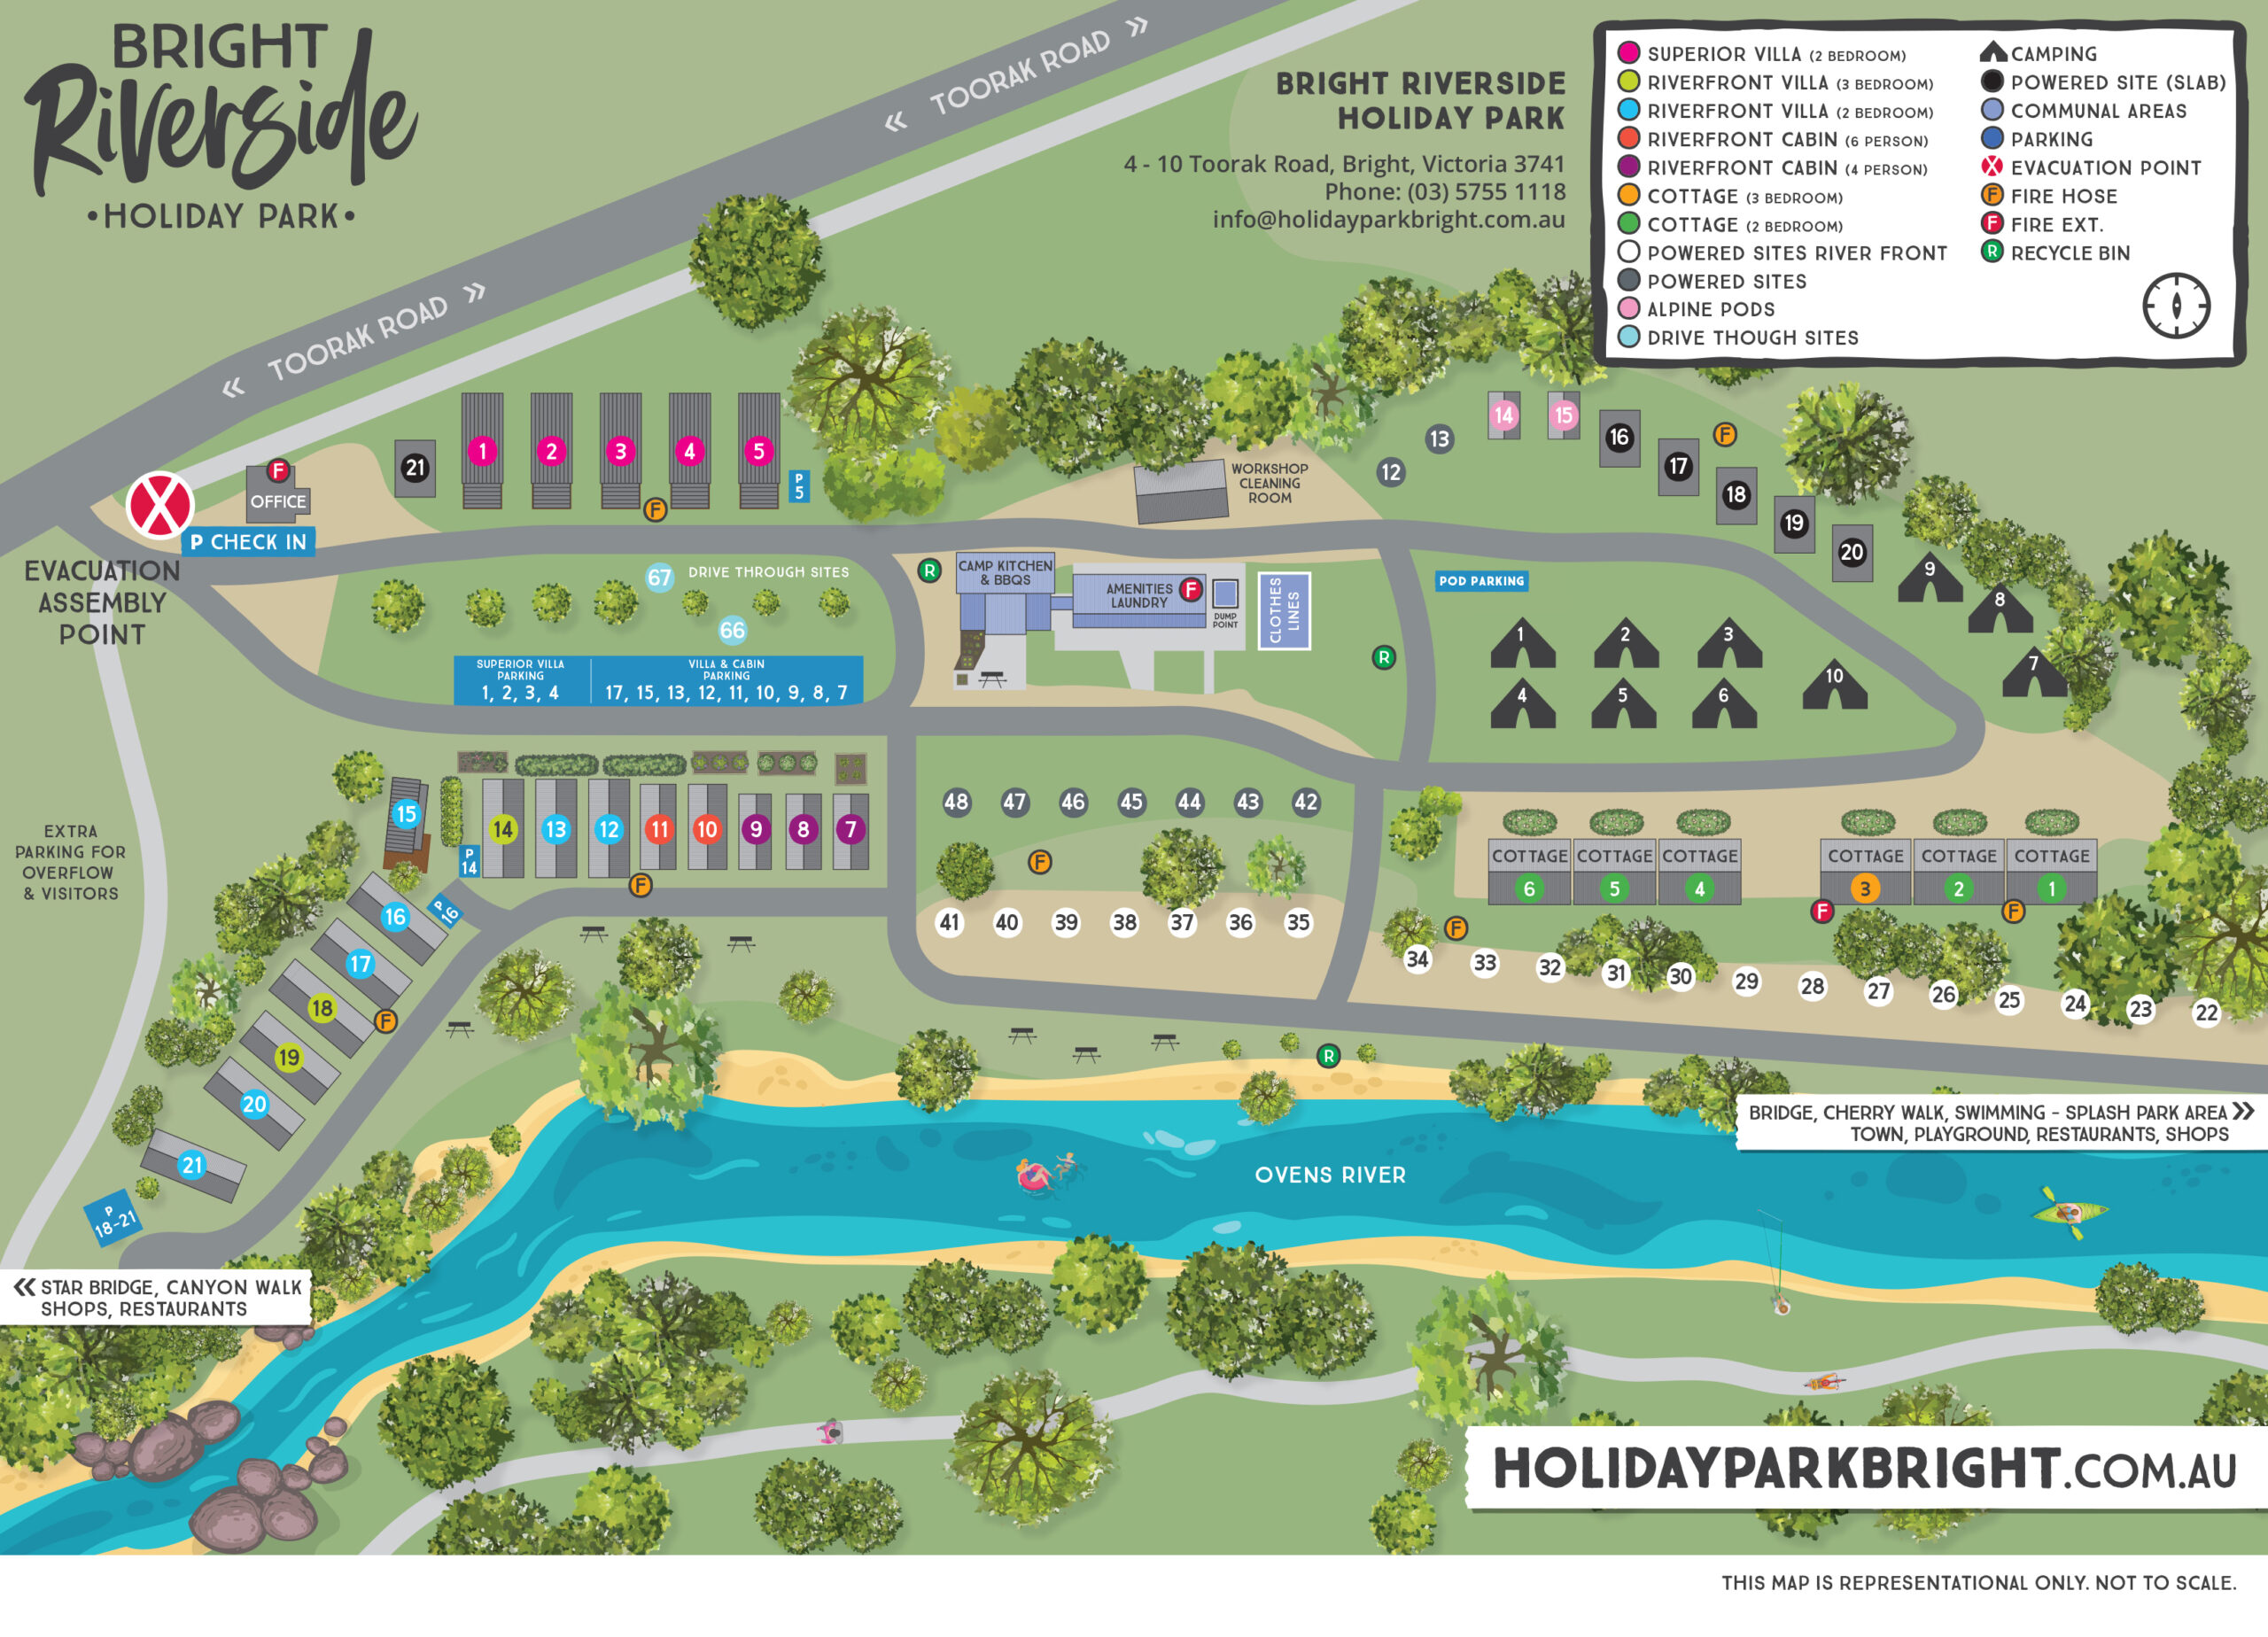 Map of Bright Riverside Holiday Park